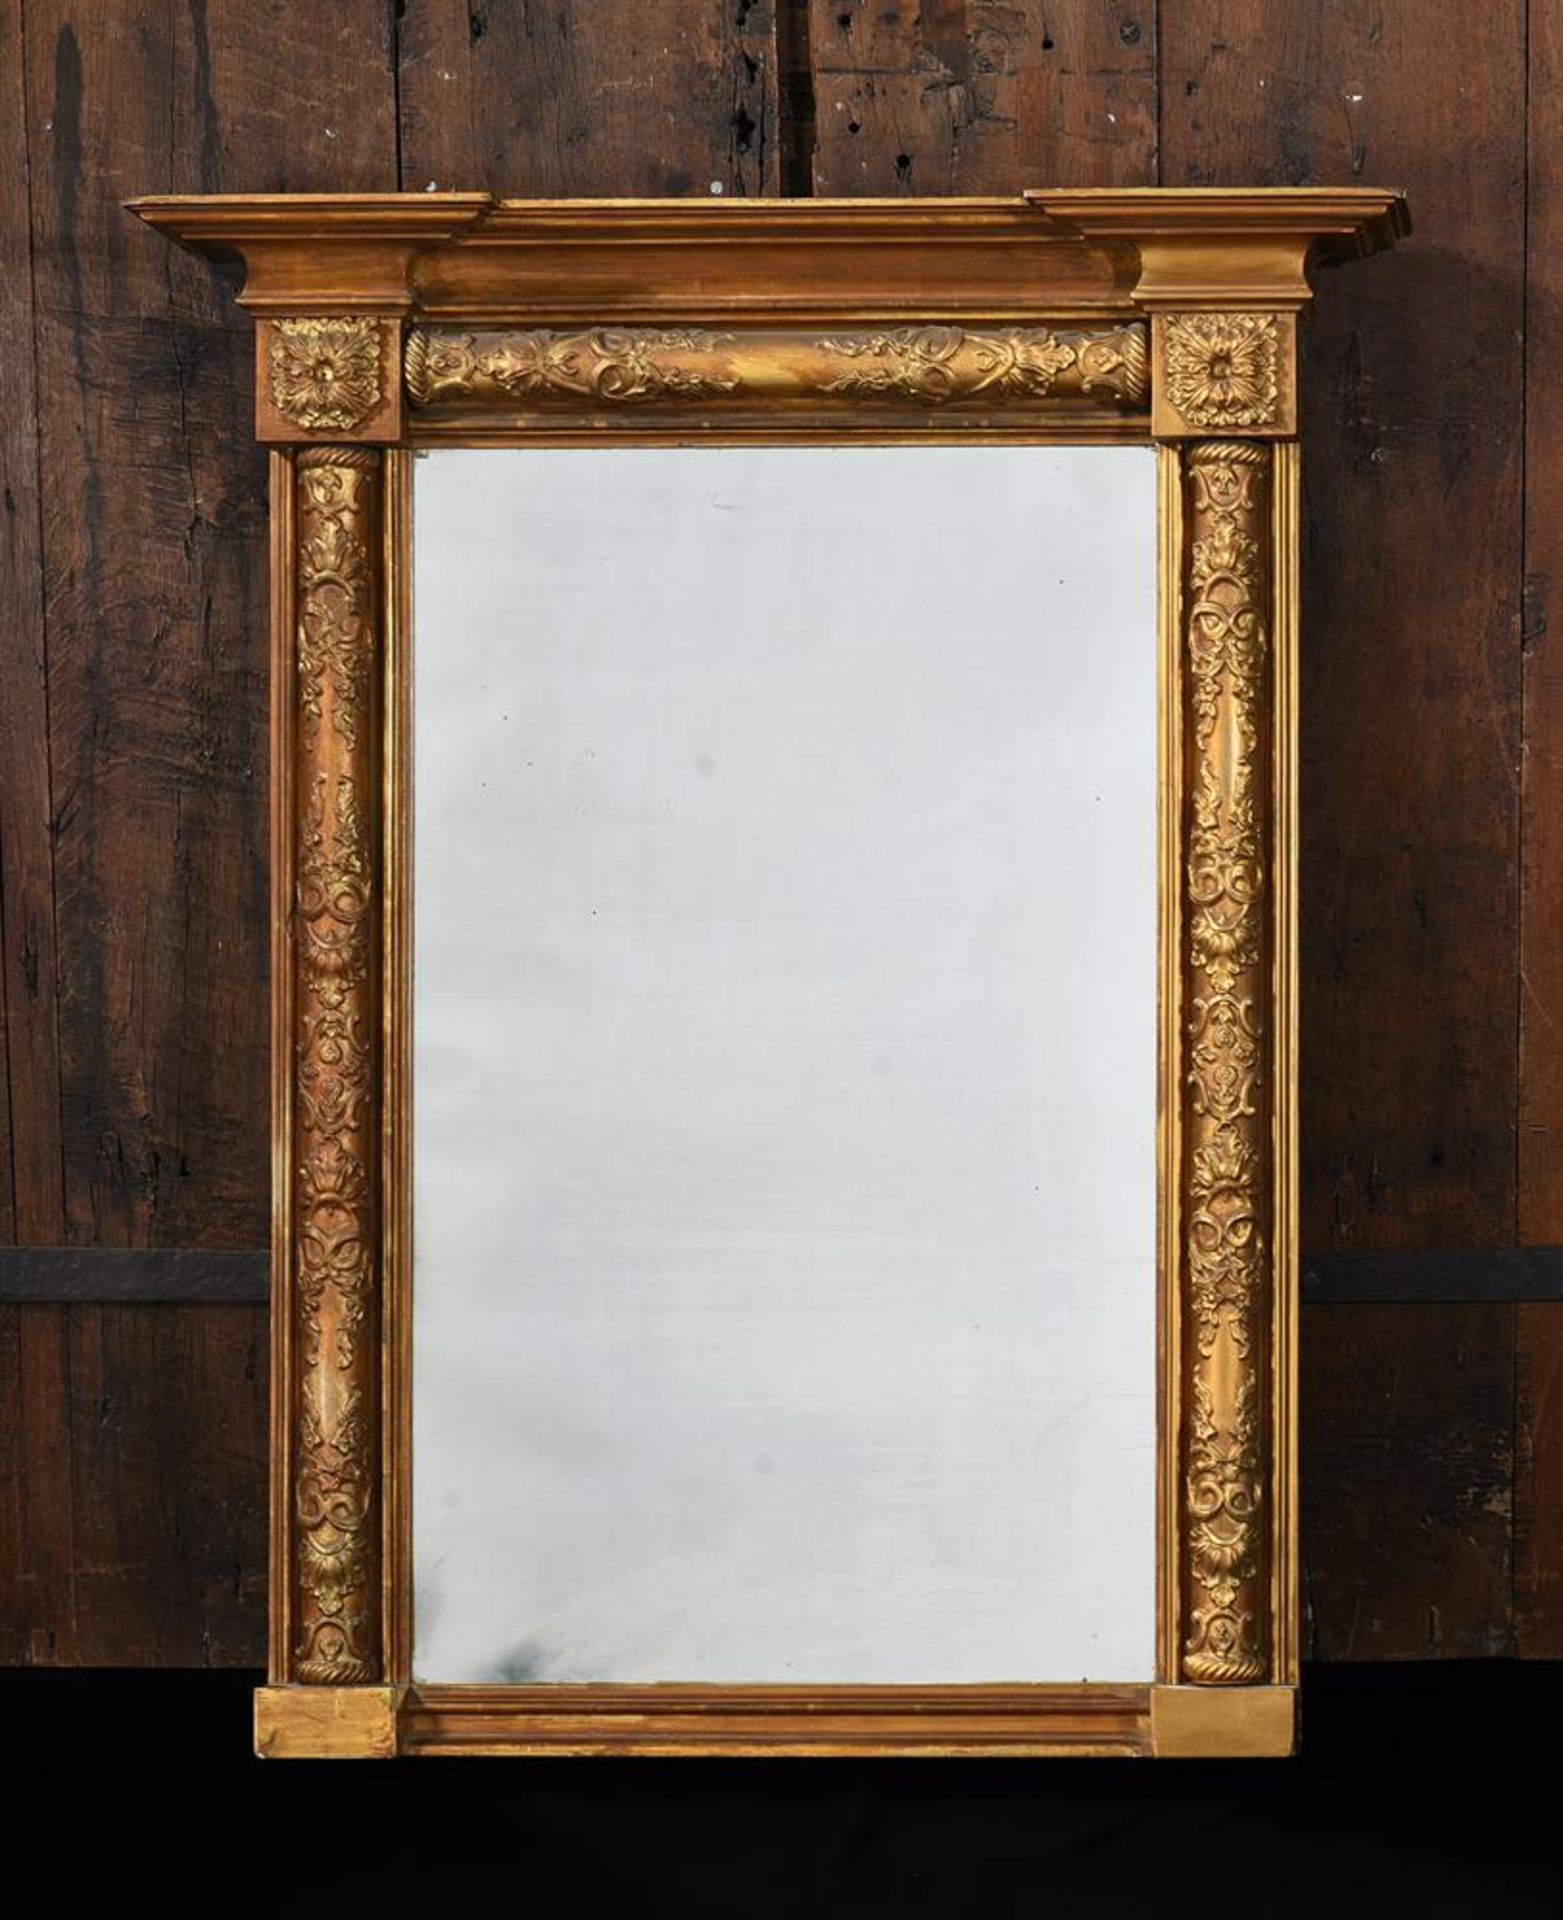 A VICTORIAN GILTWOOD AND COMPOSITION OVERMANTEL WALL MIRROR, MID 19TH CENTURY